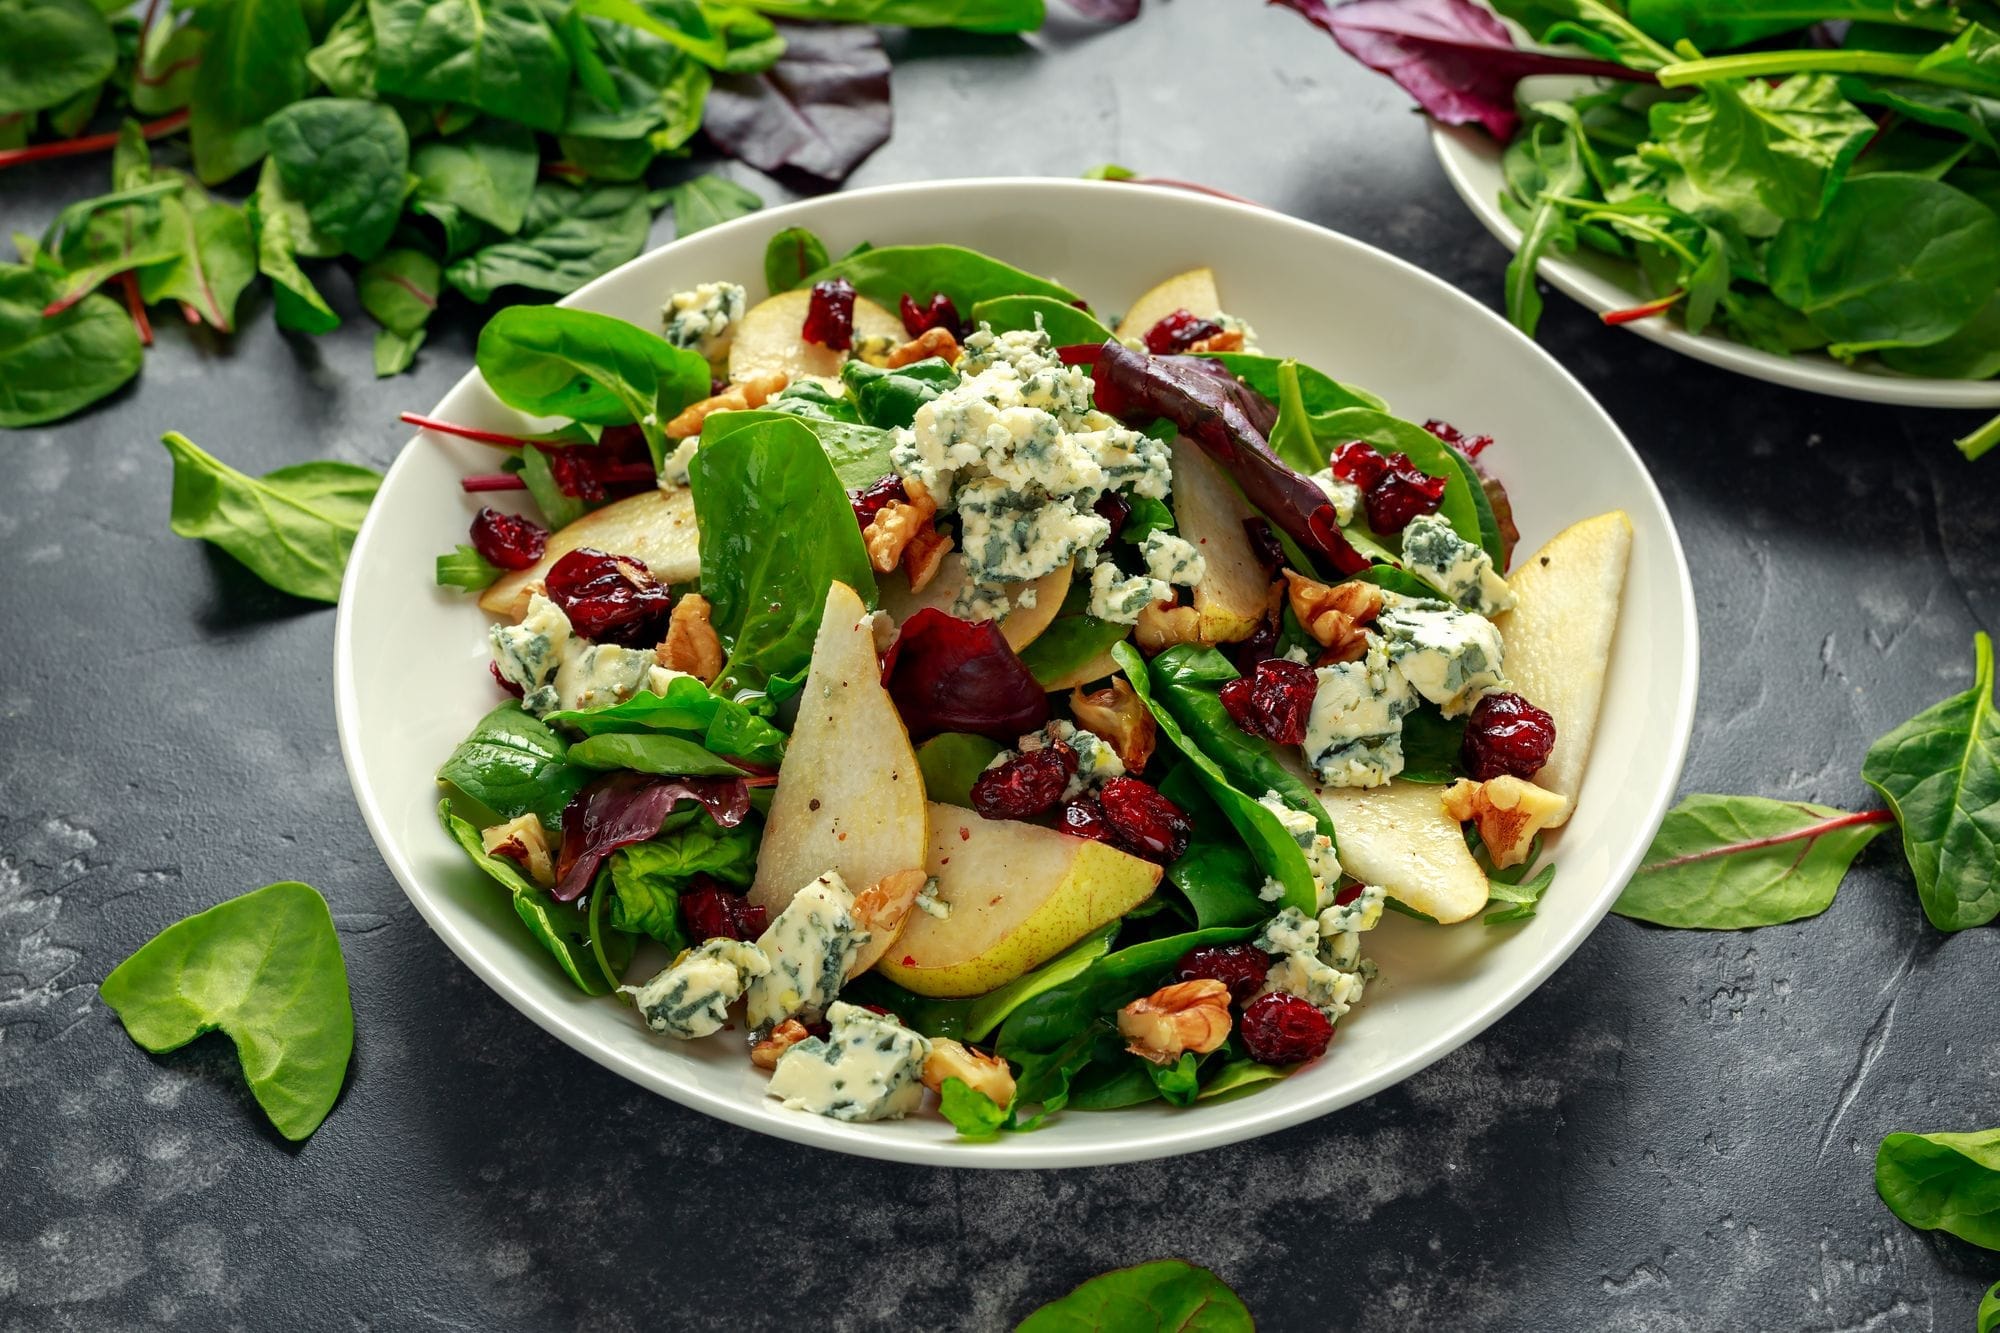 Pear, Bacon and Goat’s Cheese Salad